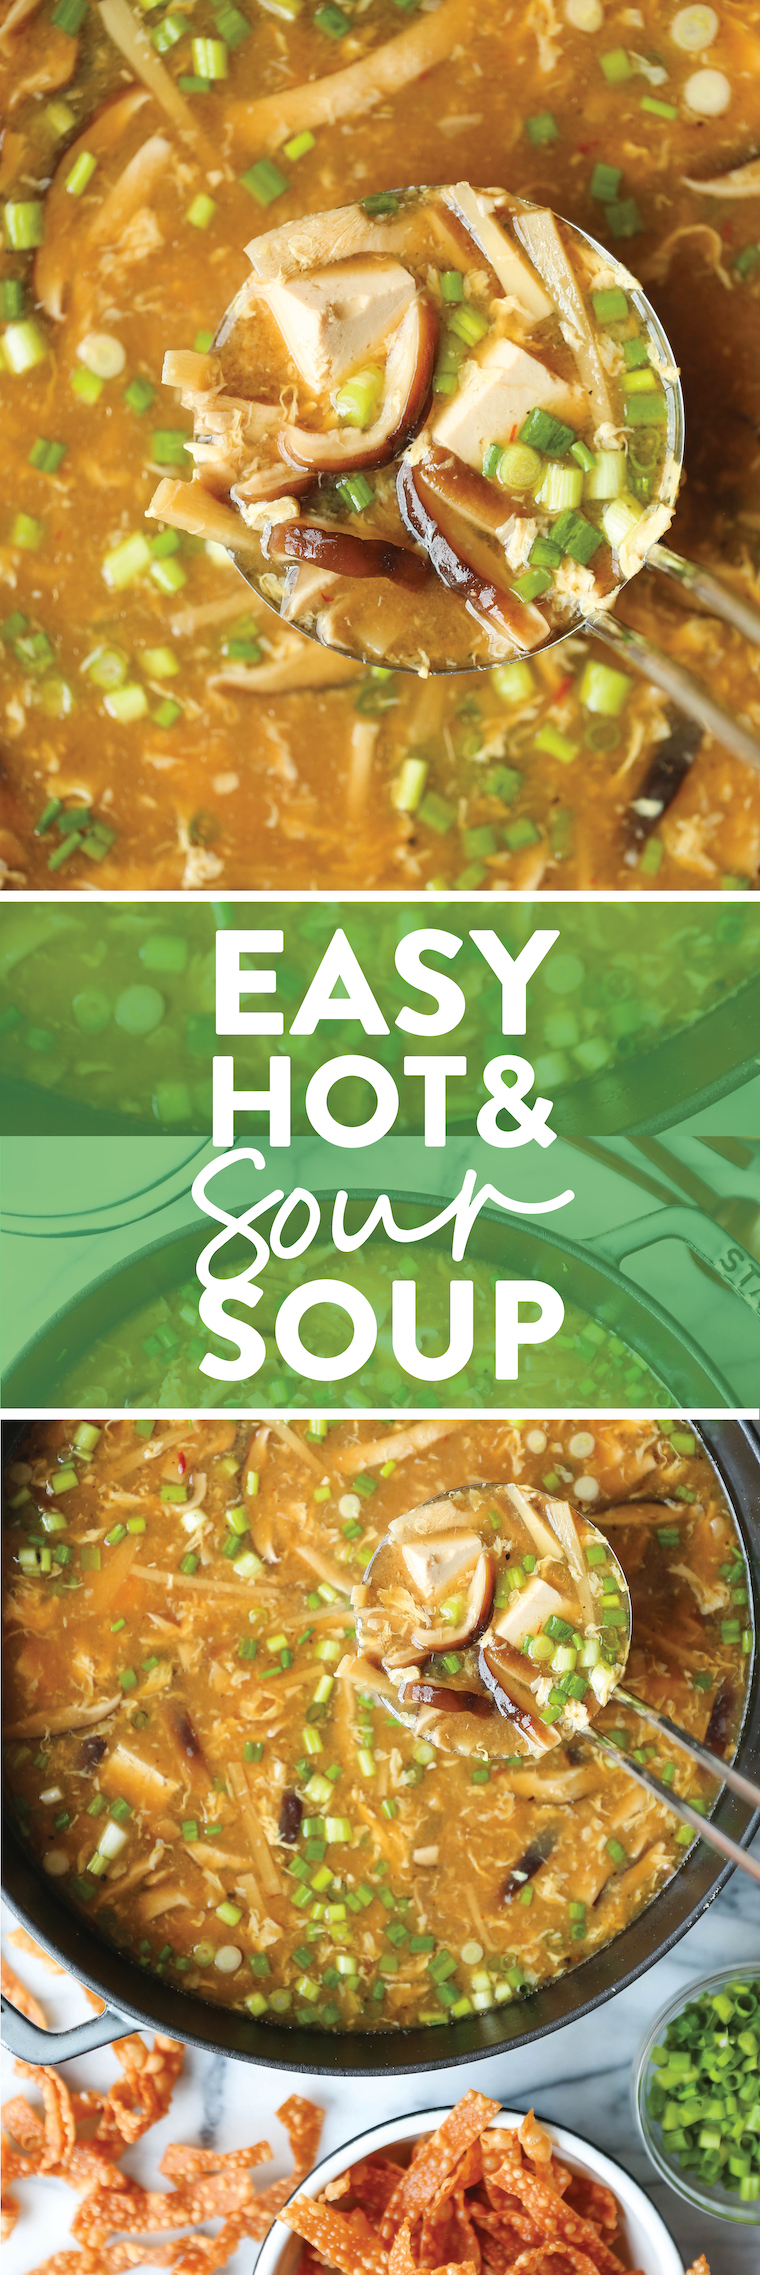 Easy Hot and Sour Soup - So much tastier (and FASTER) than delivery! 30 min start to finish. Made with homemade wonton strips. SO SO GOOD.